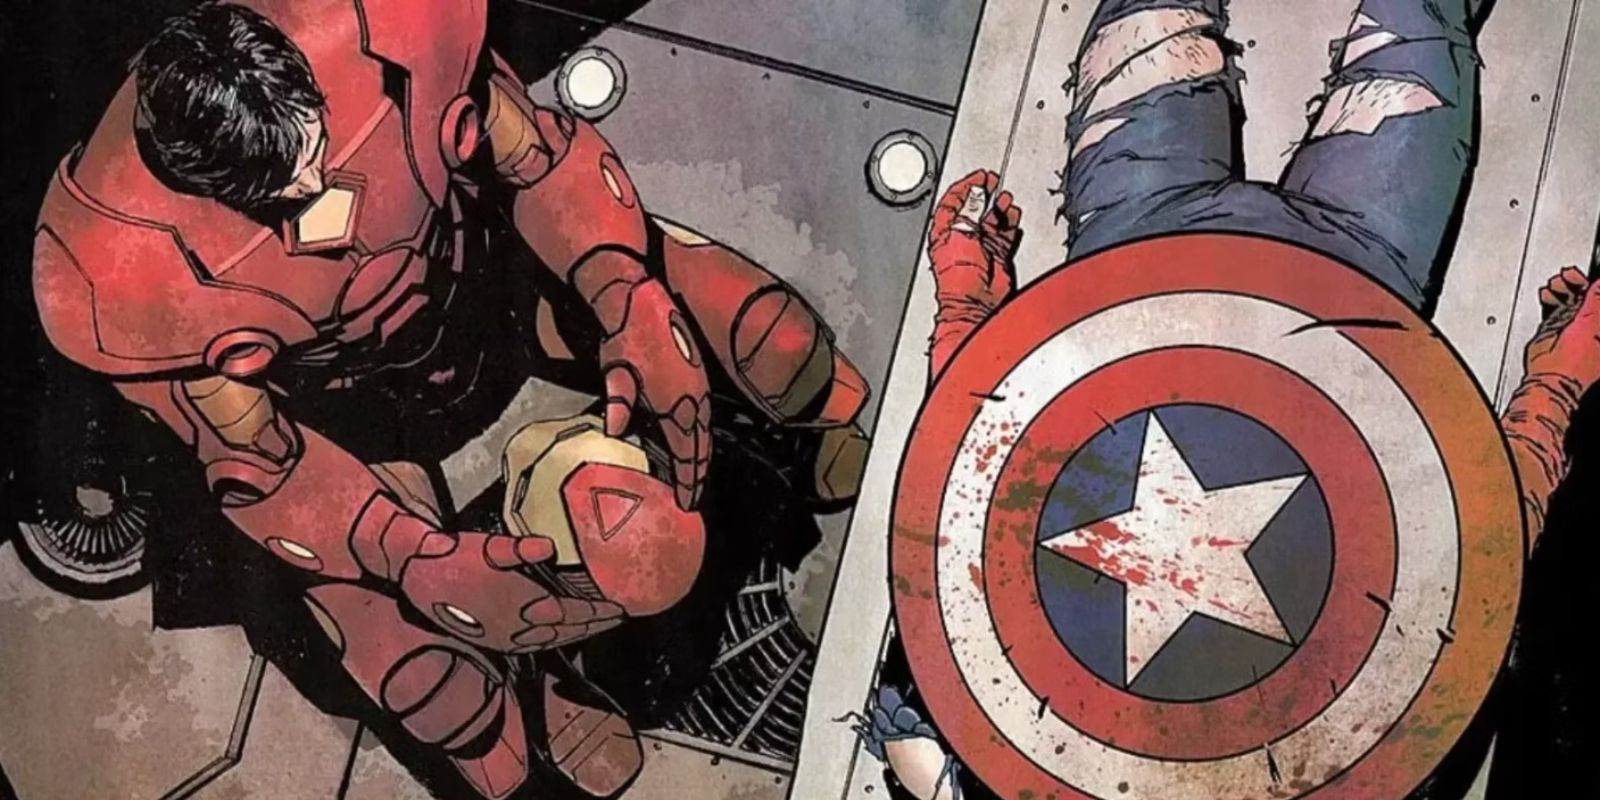 Iron Man stares at Captain America's body in 